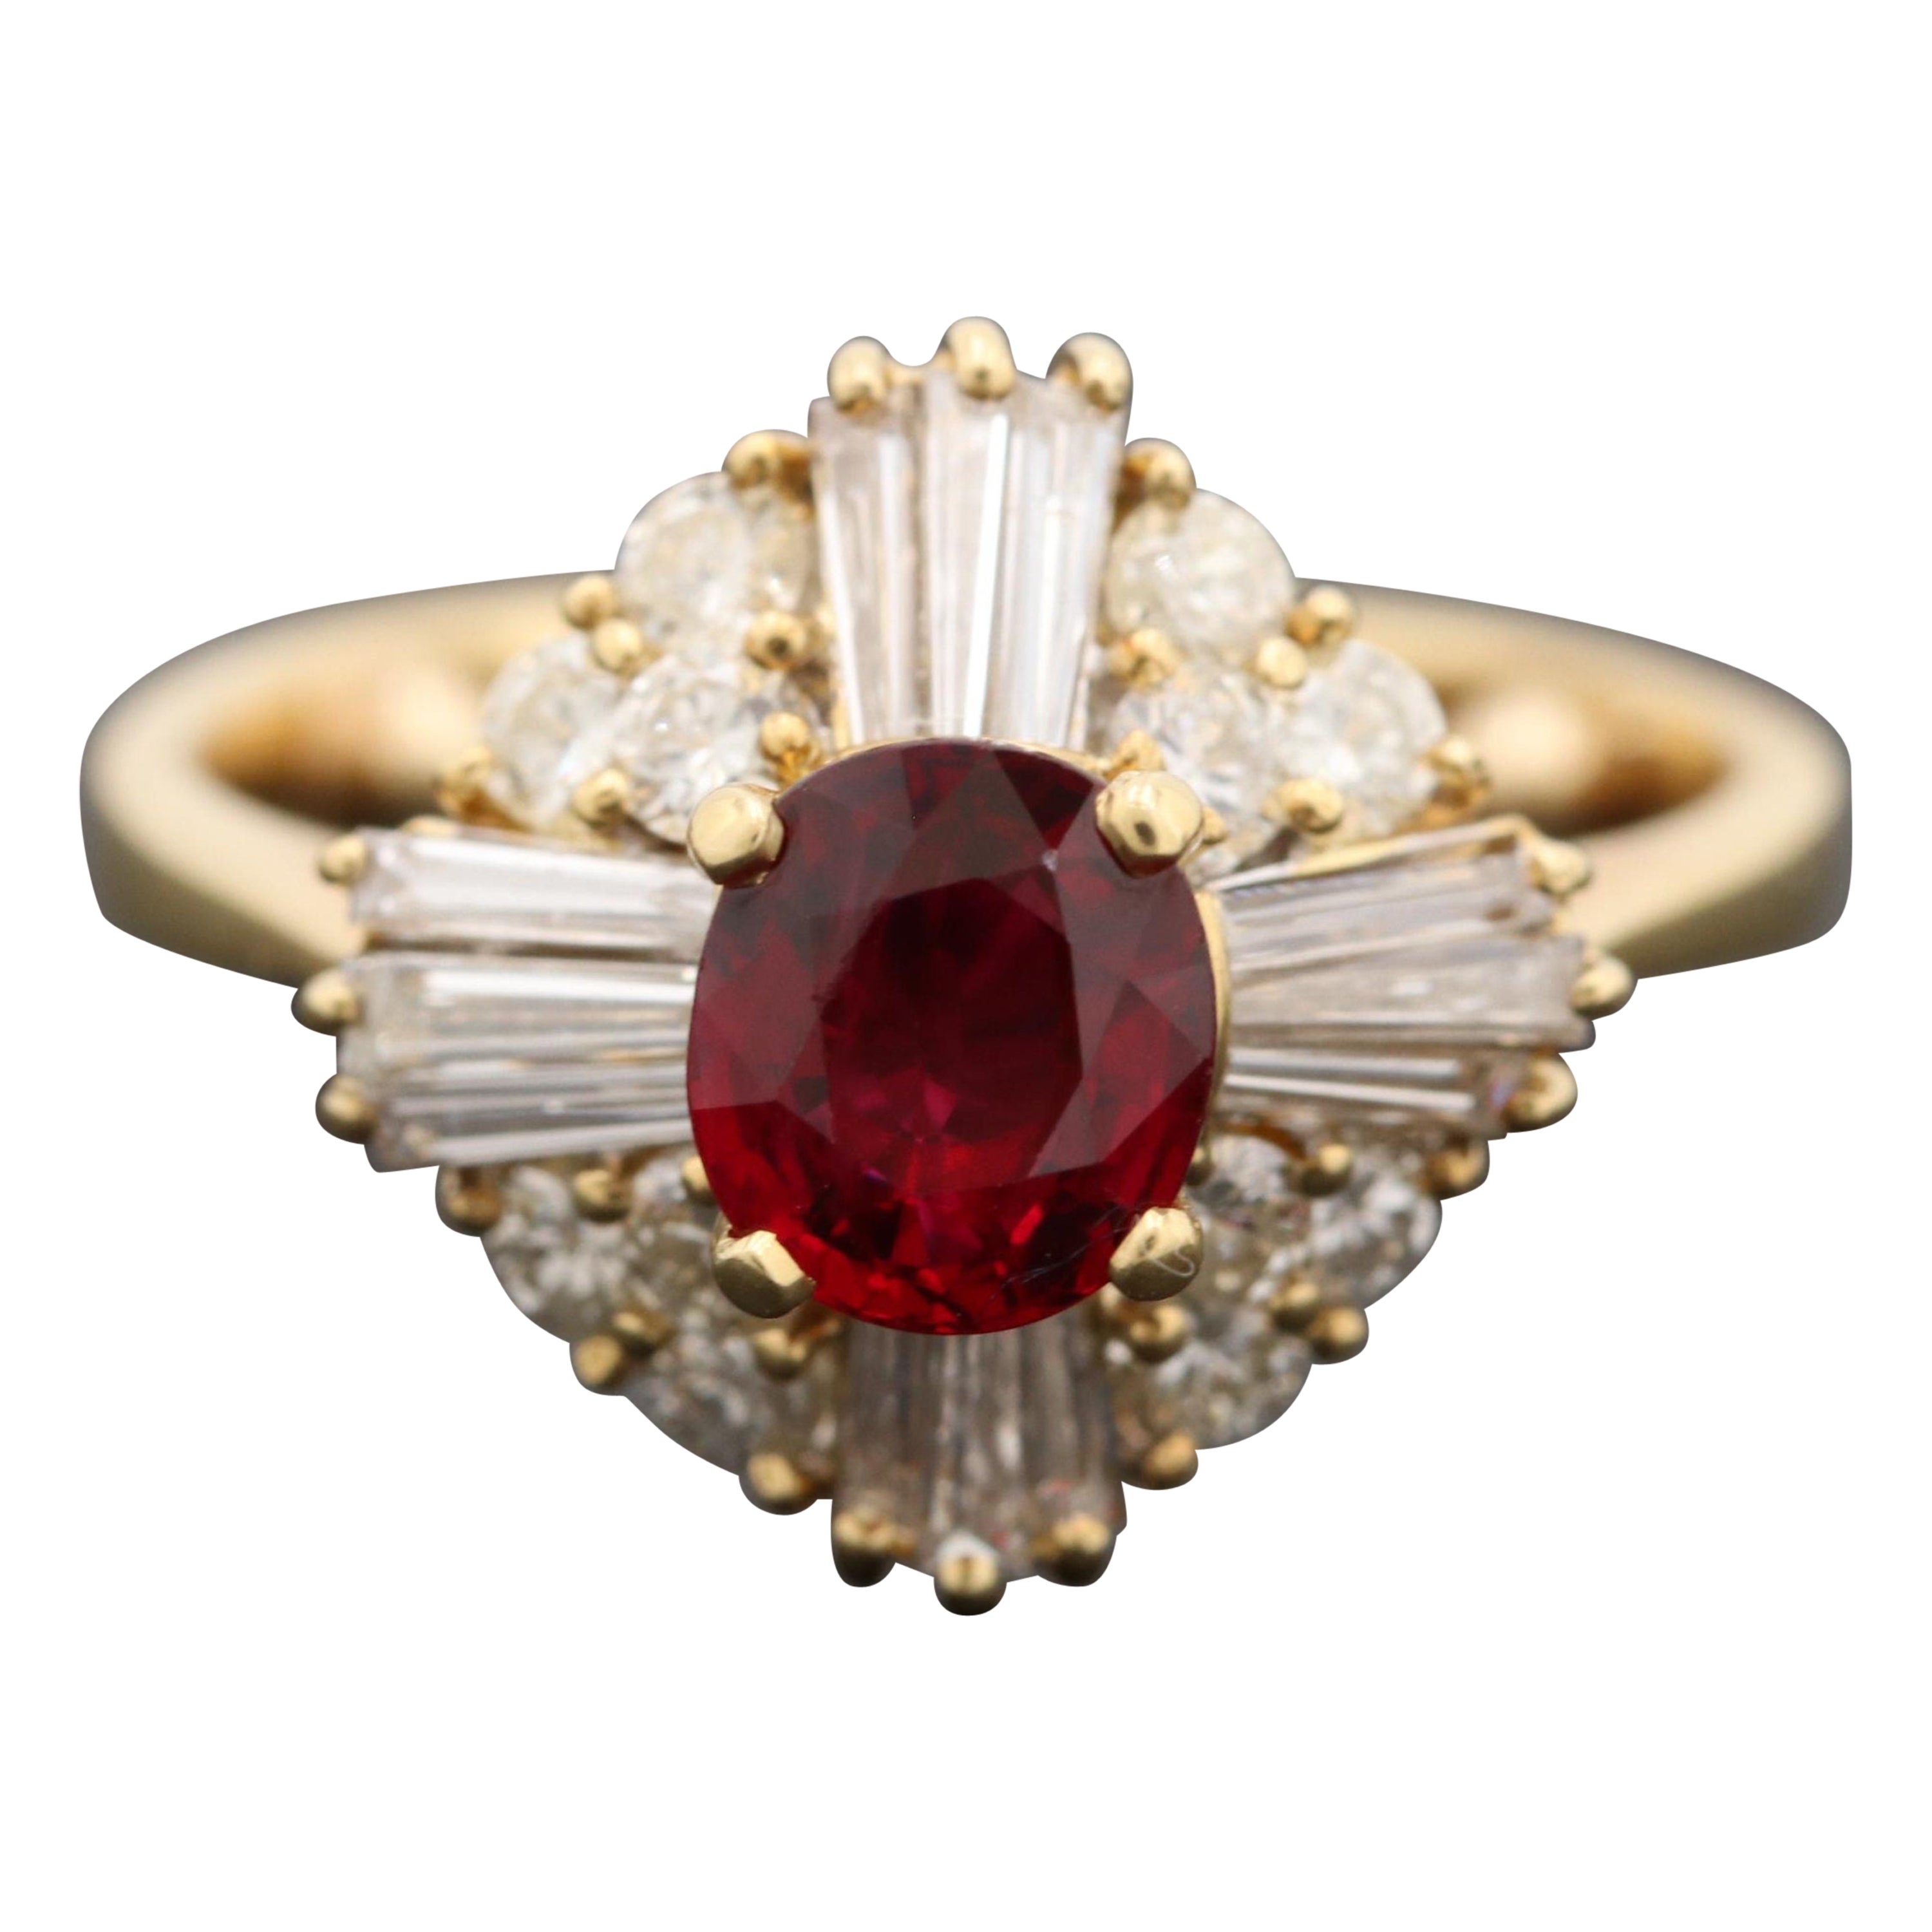 For Sale:  Floral Oval Cut Ruby Diamond Engagement Ring Victorian Ruby Diamond Wedding Ring